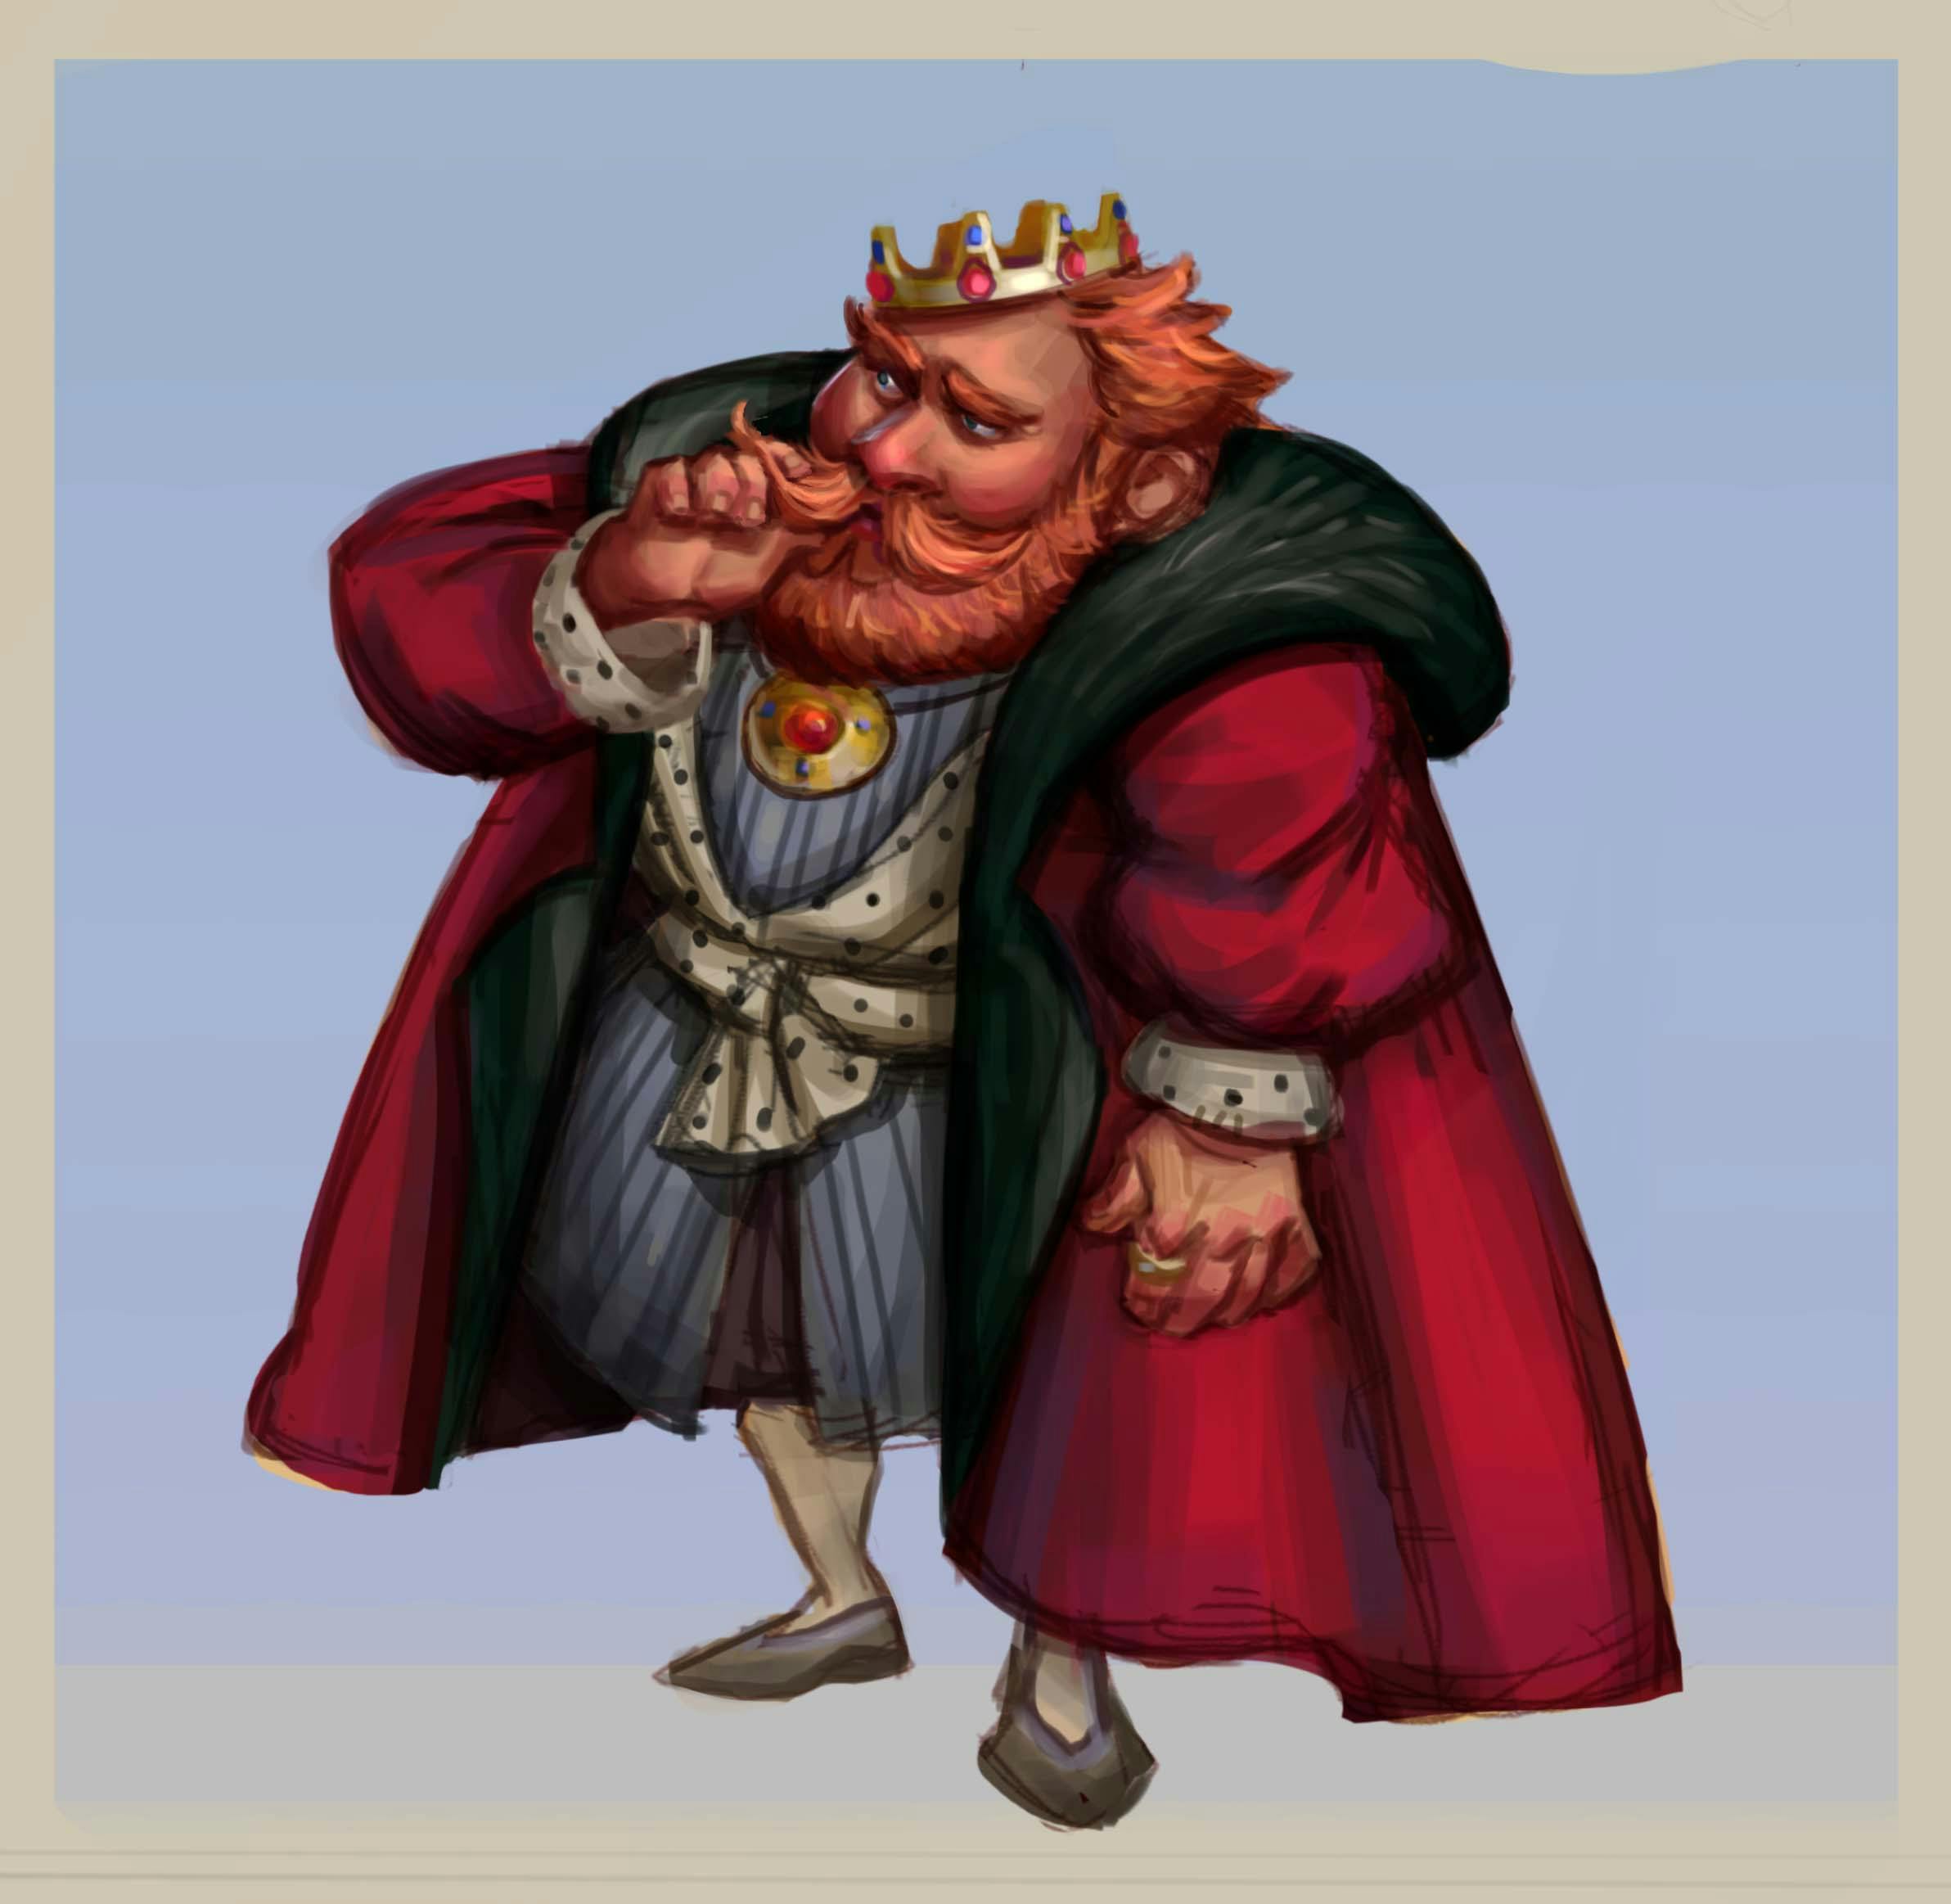 Character concept of a king